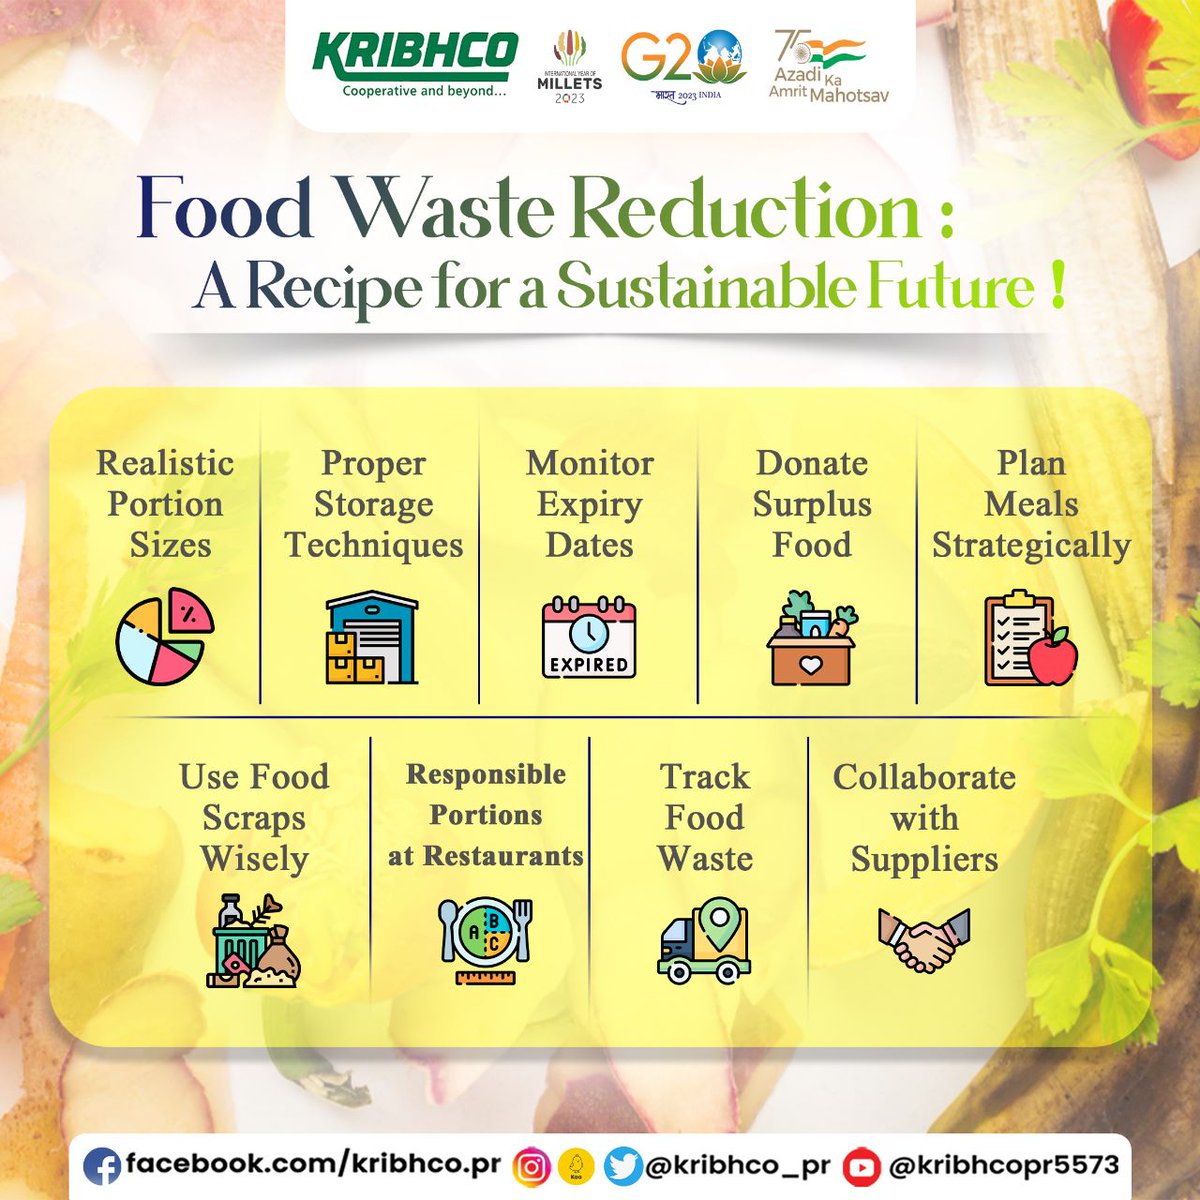 Did you know that millions of tons of food are wasted each year, while millions still go hungry? 

It's time for a change! Let's work together to reduce food waste and create a more sustainable world. 

#ReduceFoodWaste #FoodSustainability #FoodWasteAwareness